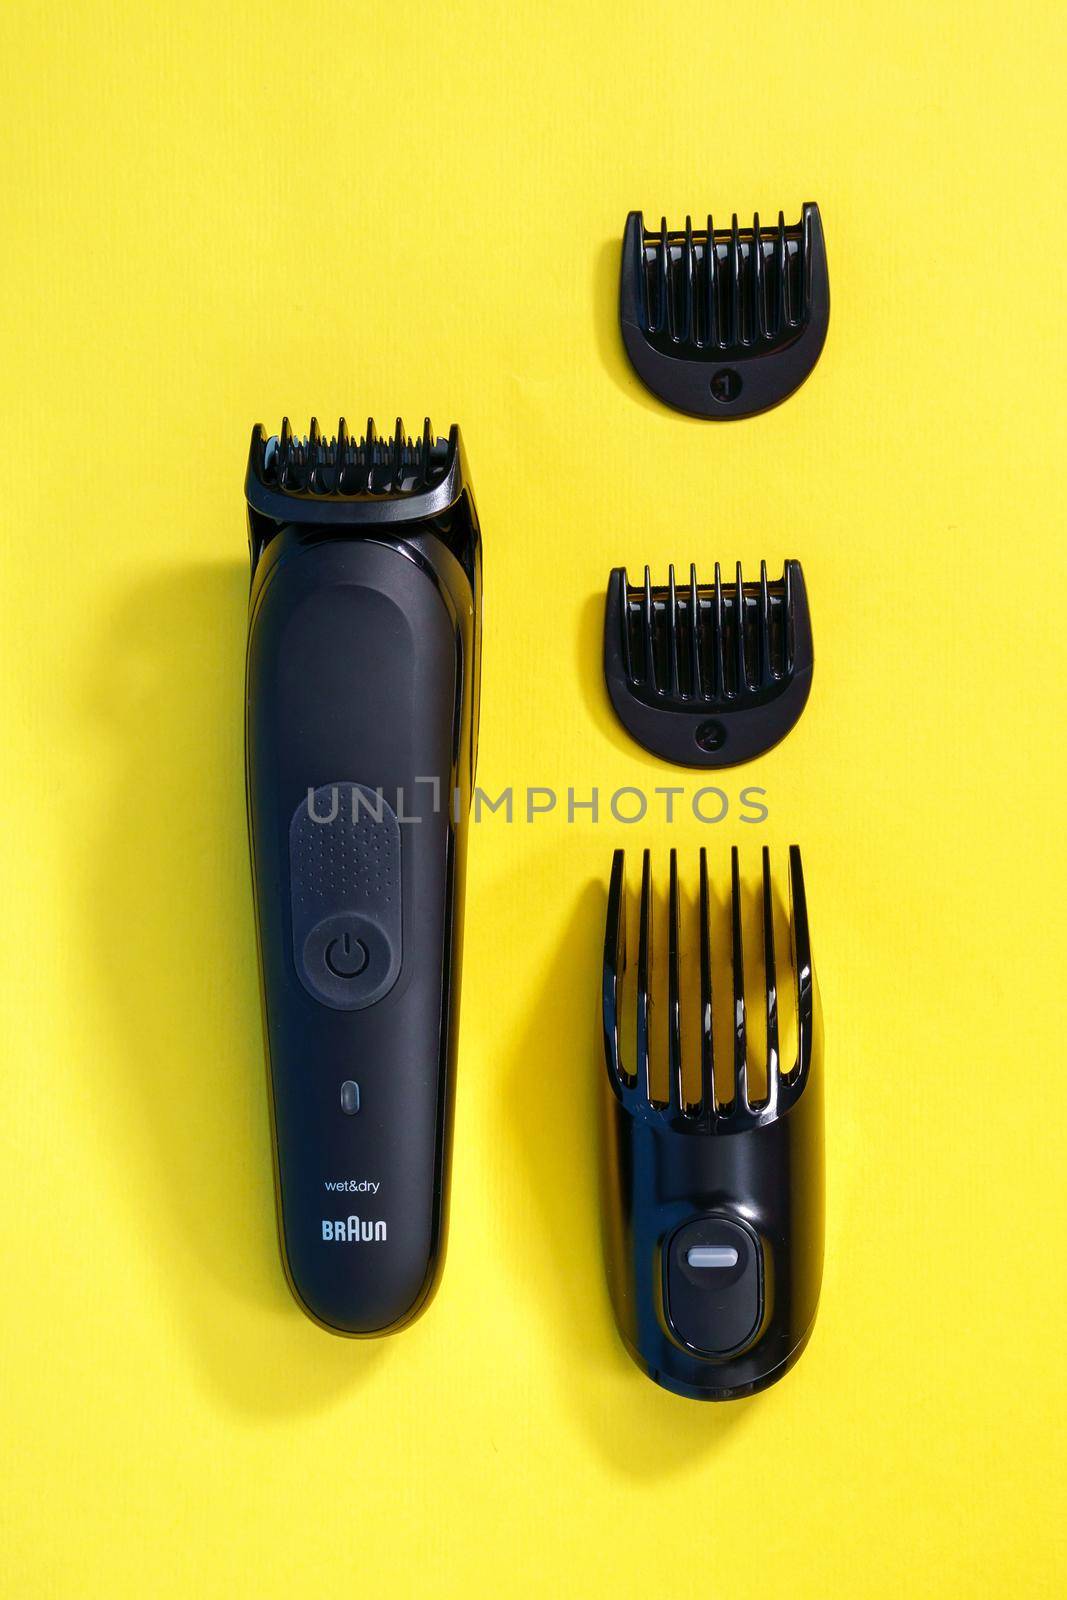 Tyumen, Russia - April 14, 2021: Braun Wet and Dry Electric Mens Shaver. On a yellow background